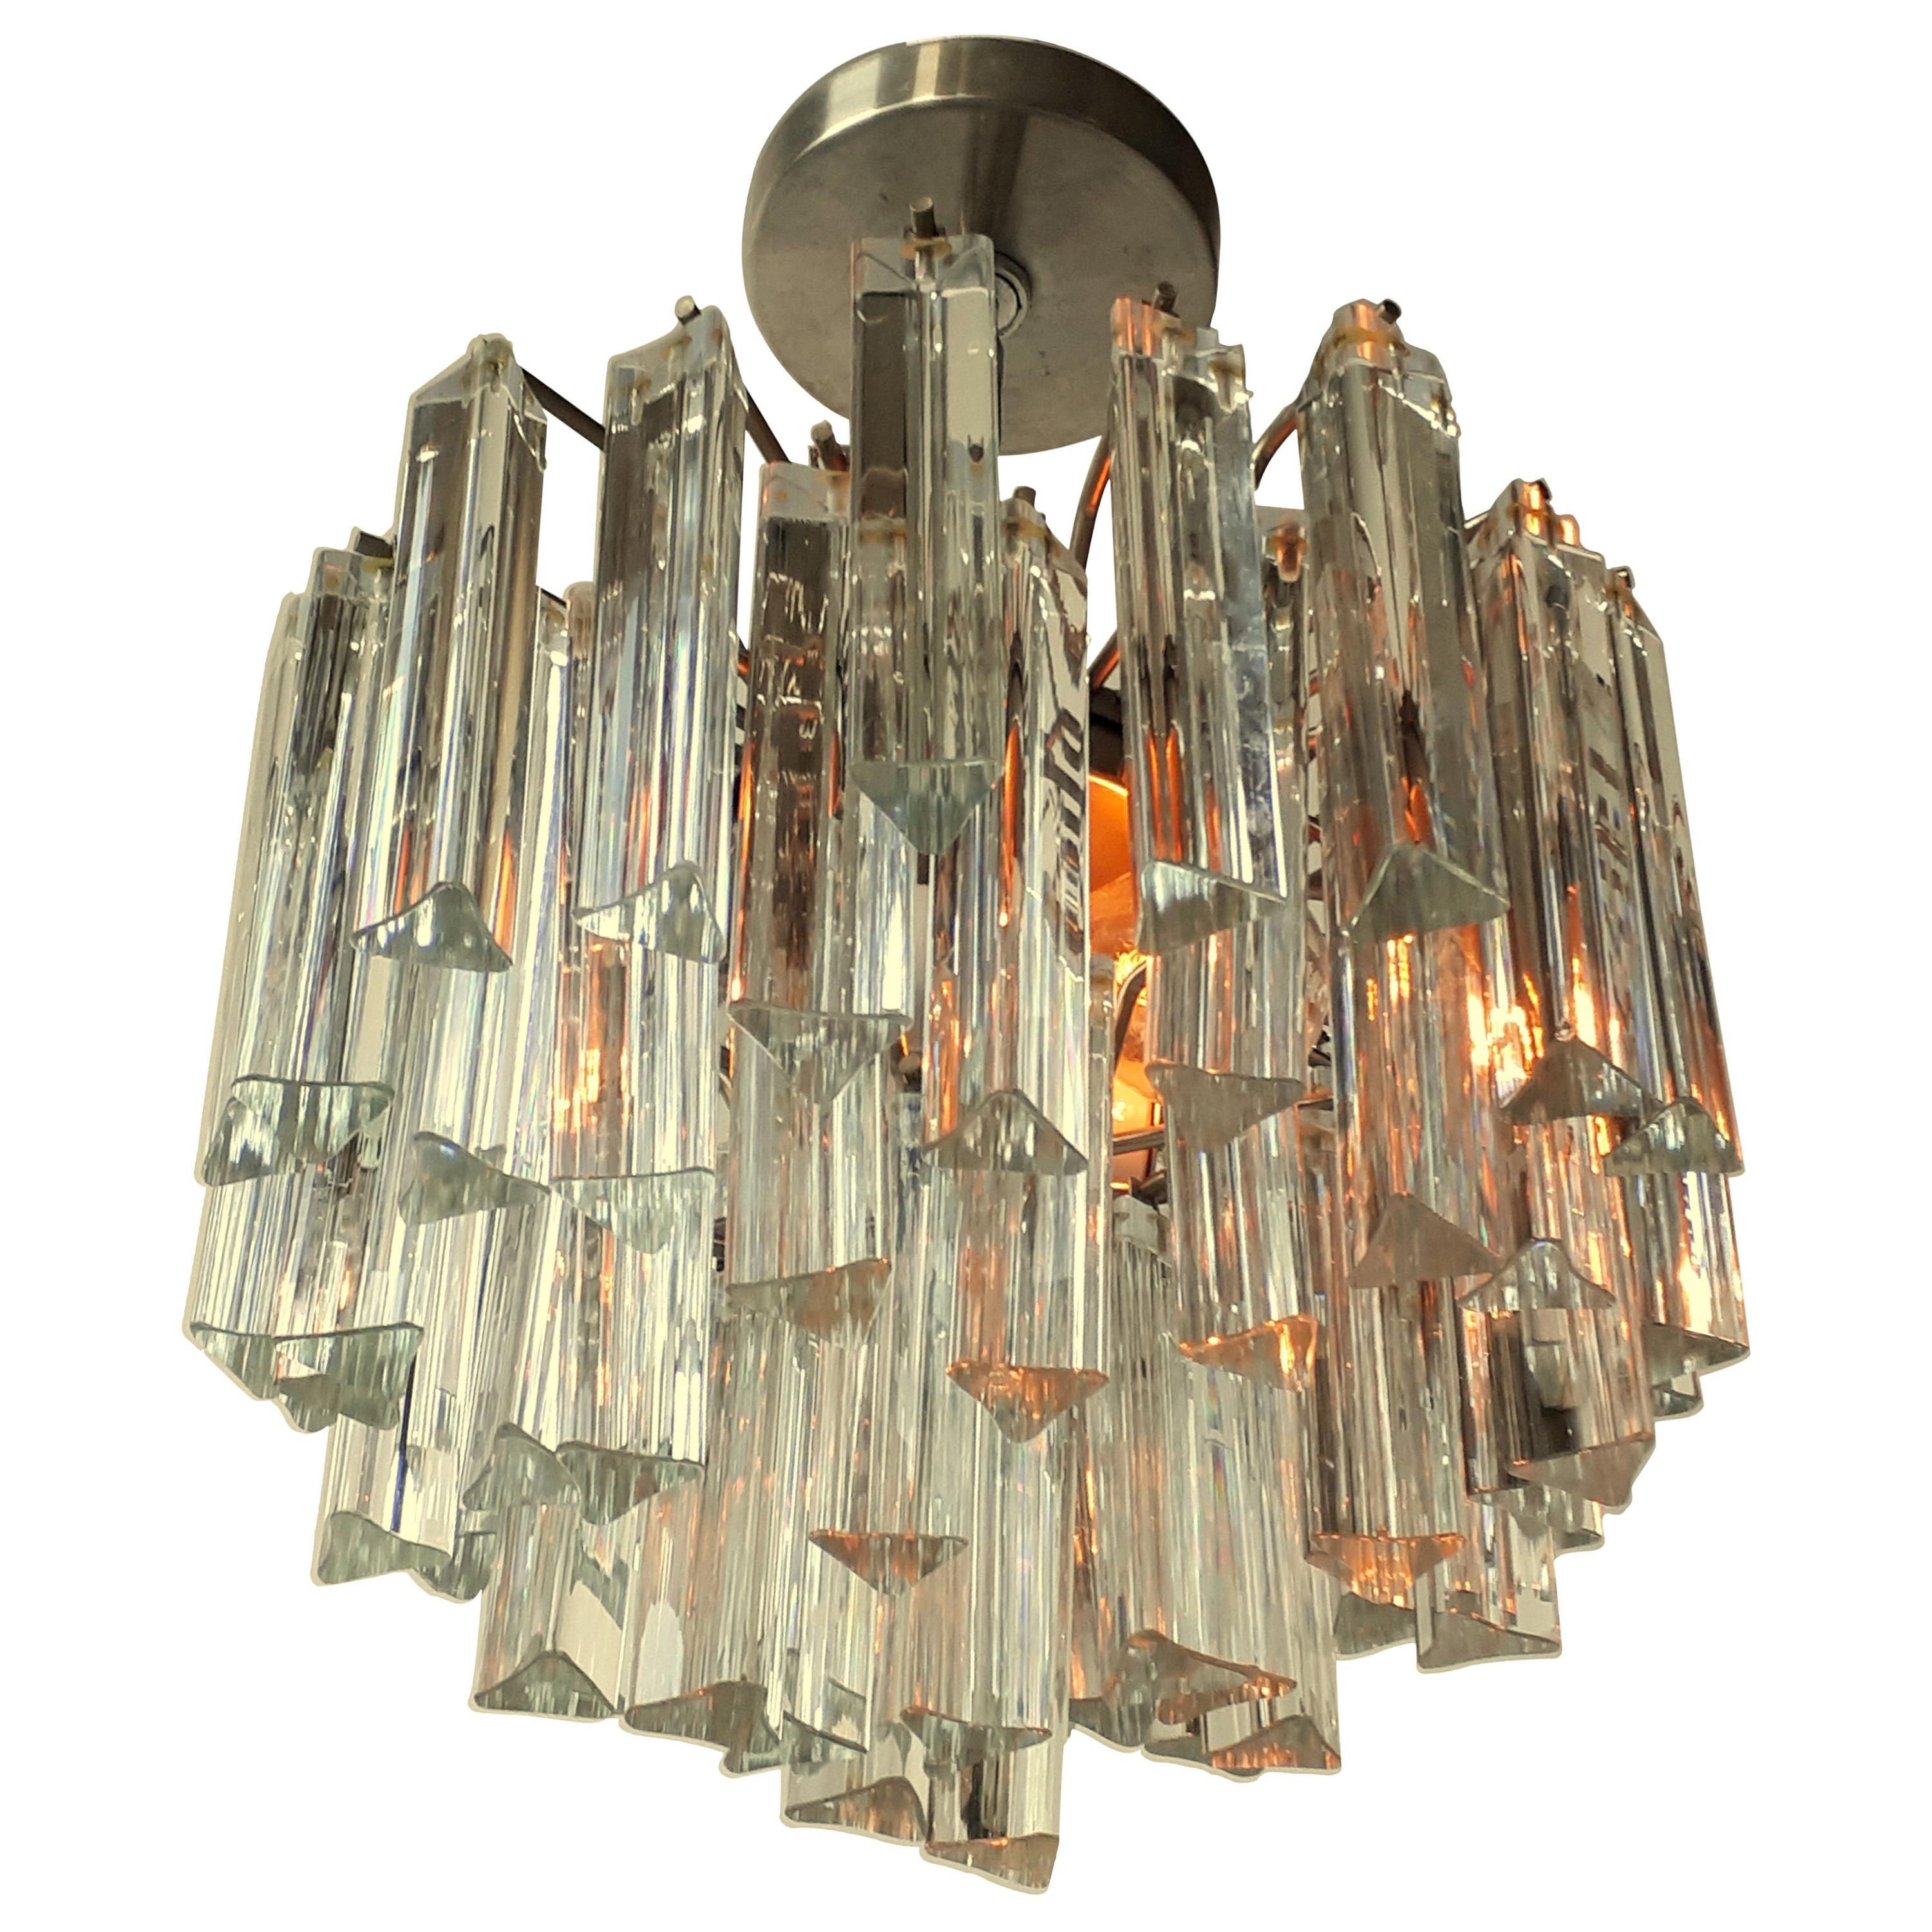 Camer, Venini Solid Glass Chandelier or Pendant, 1960s, Italy